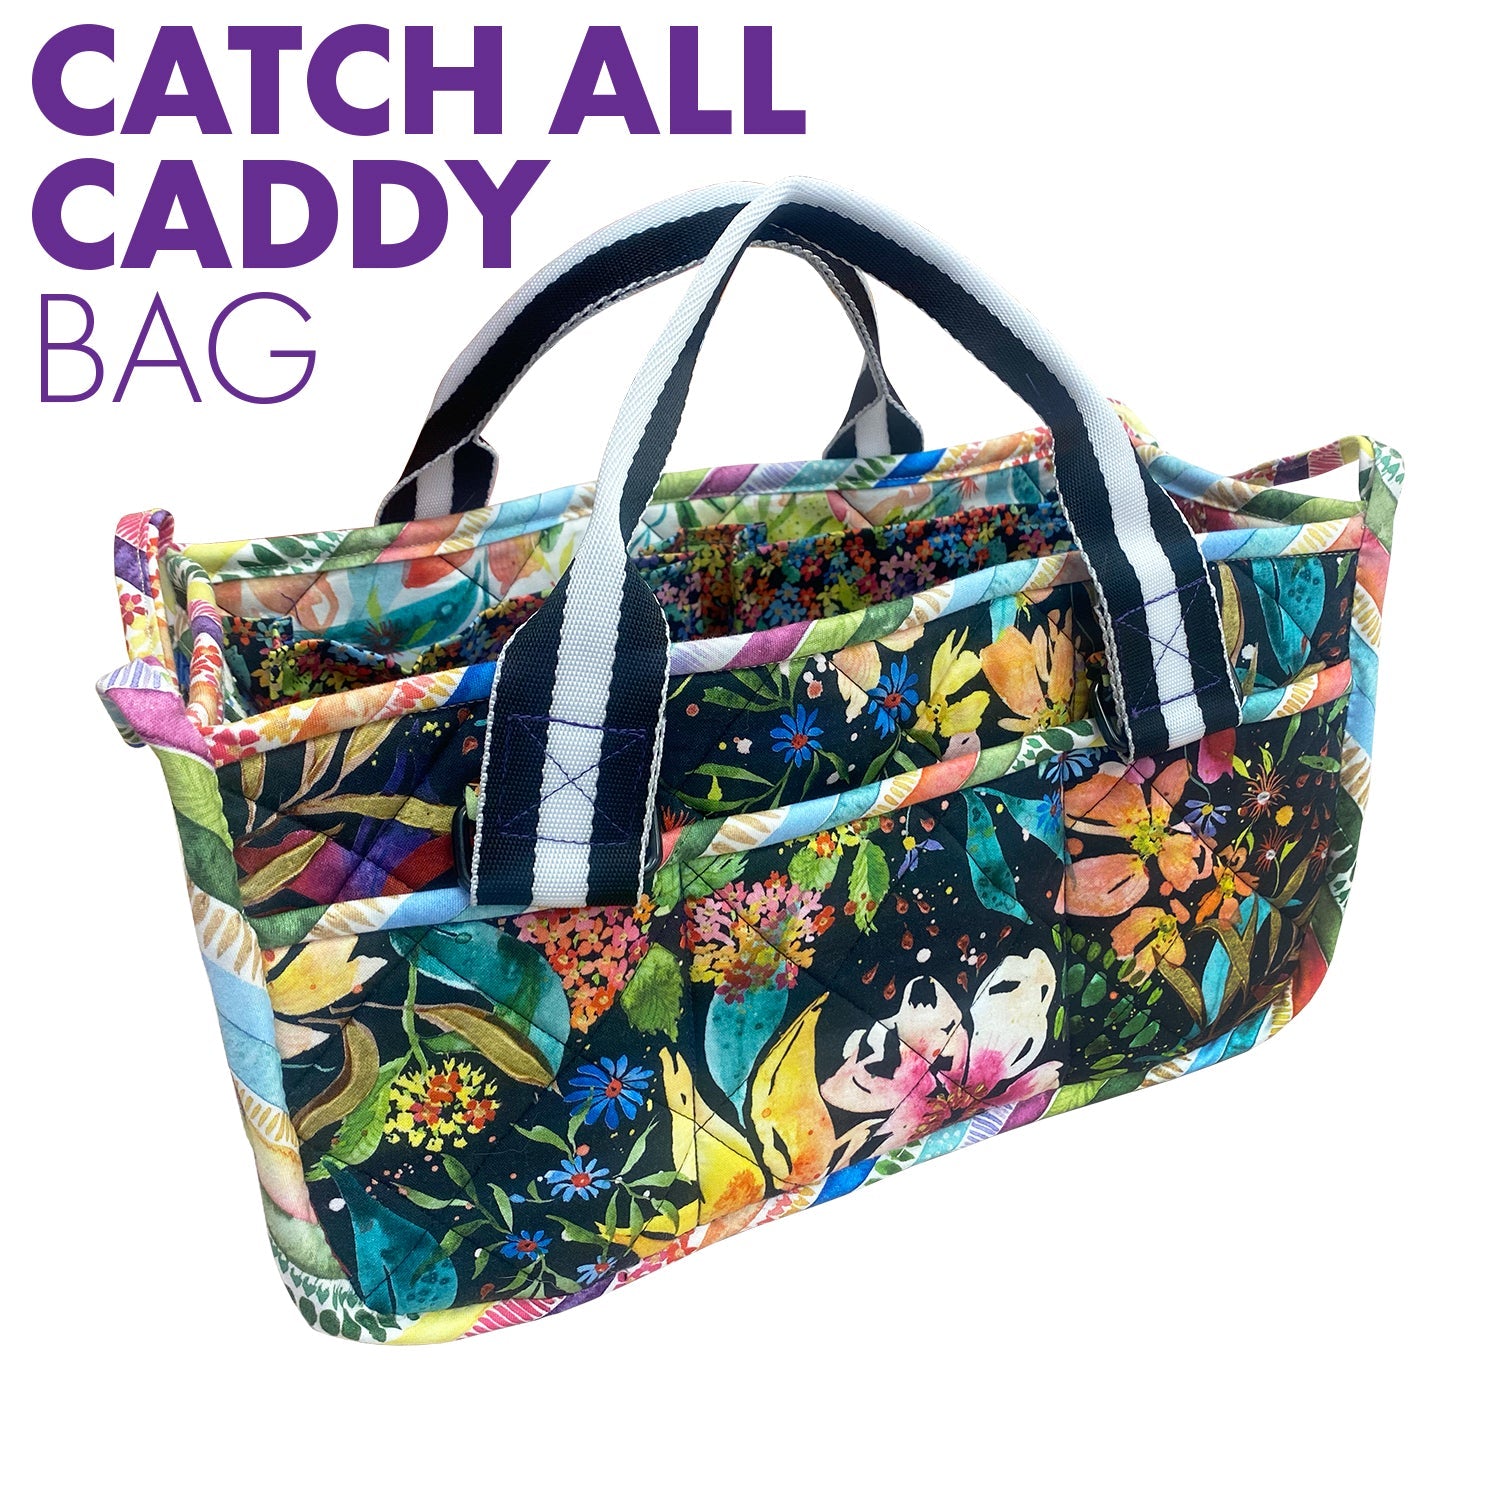 Bags Galore! "Catch All Caddy" Bag Class 8/25 & 9/1